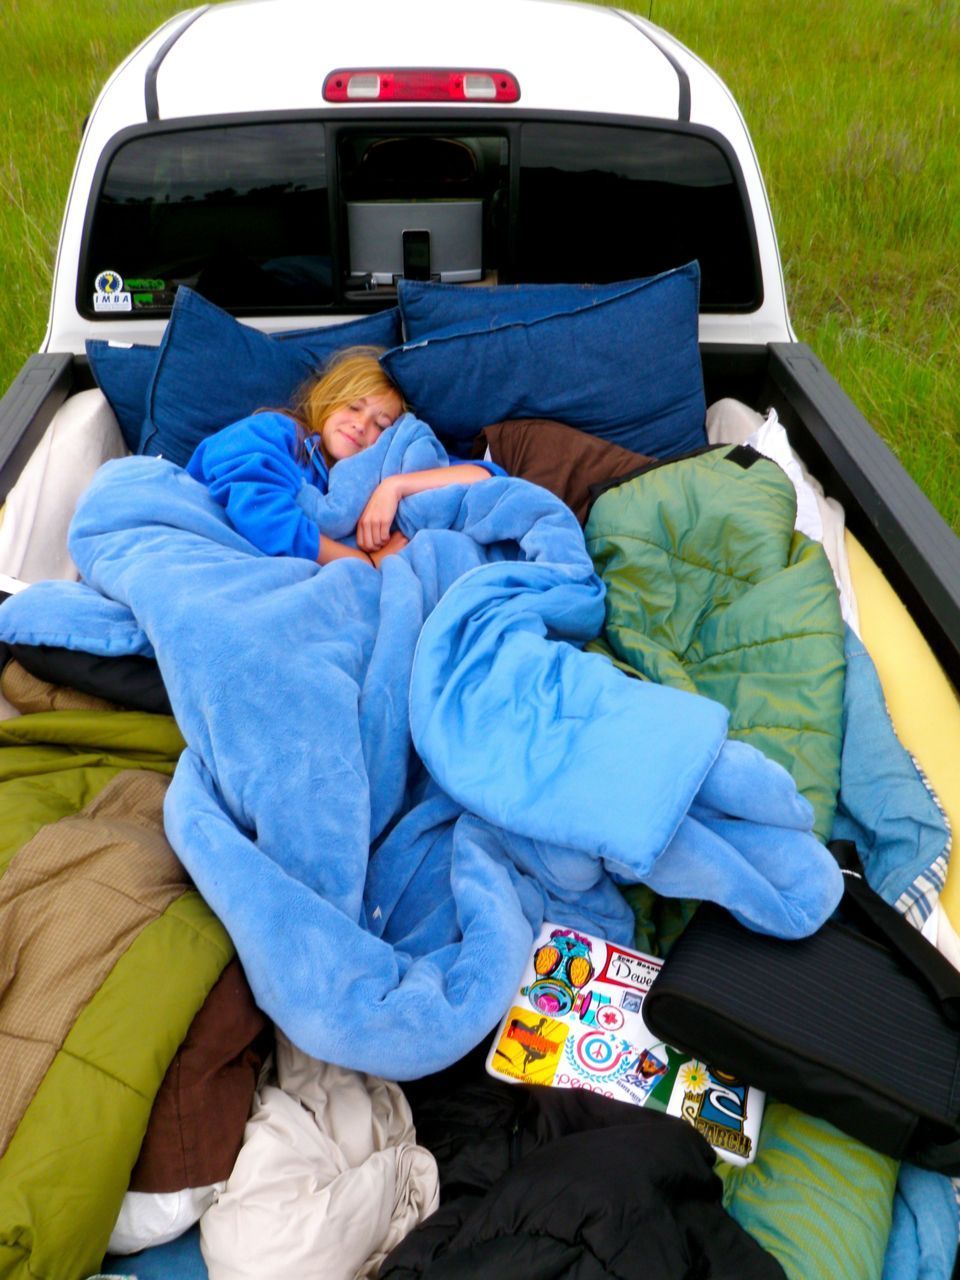 fill a truck bed full of pillows and blankets and drive in the middle of nowhere